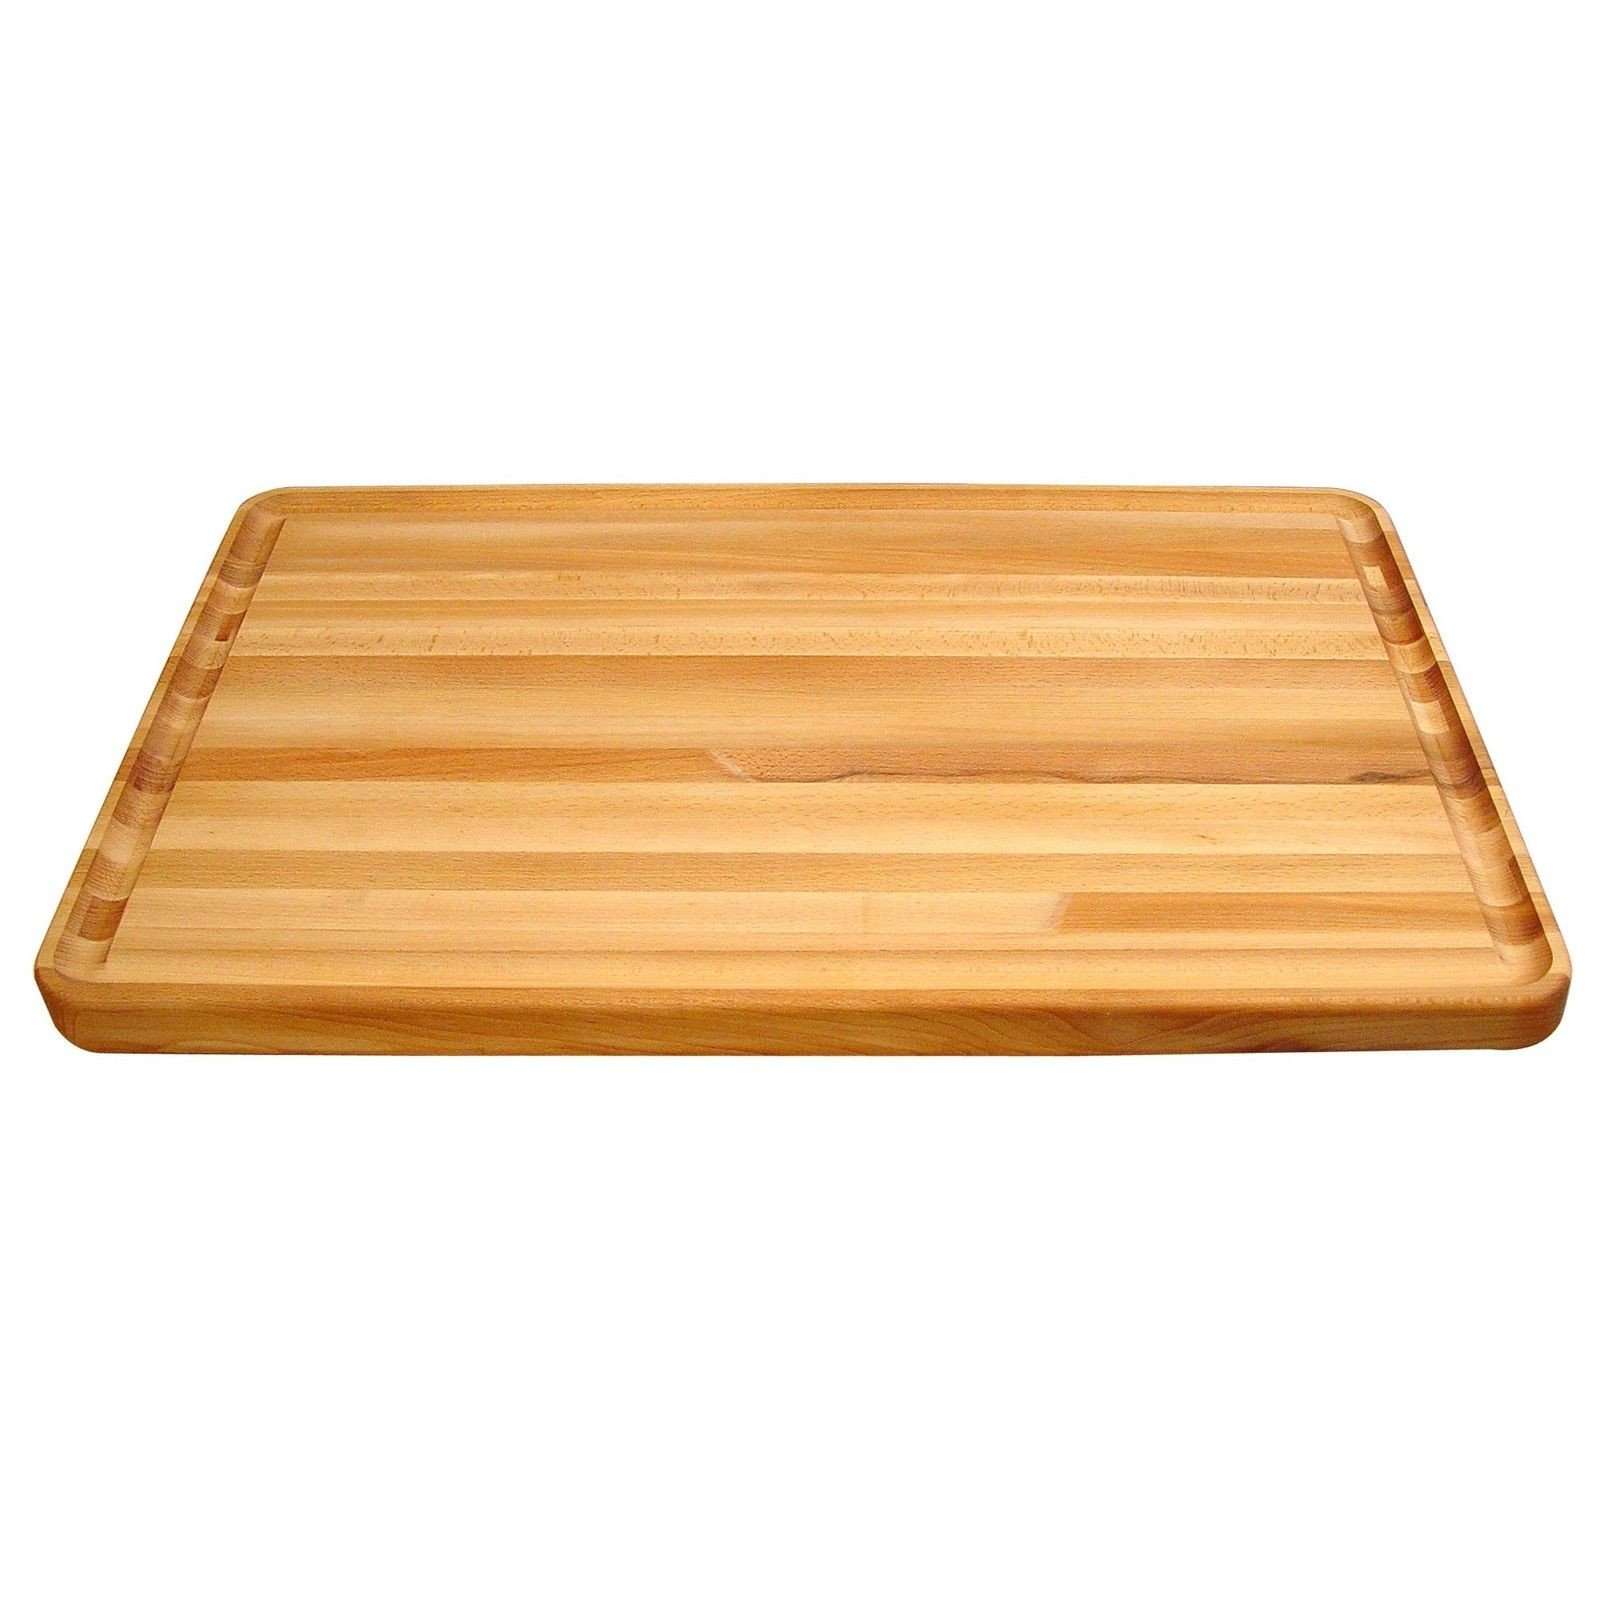 Catskill Craftsmen 30 Inch Pro Series Reversible Cutting Board With Groove Swiftsly 